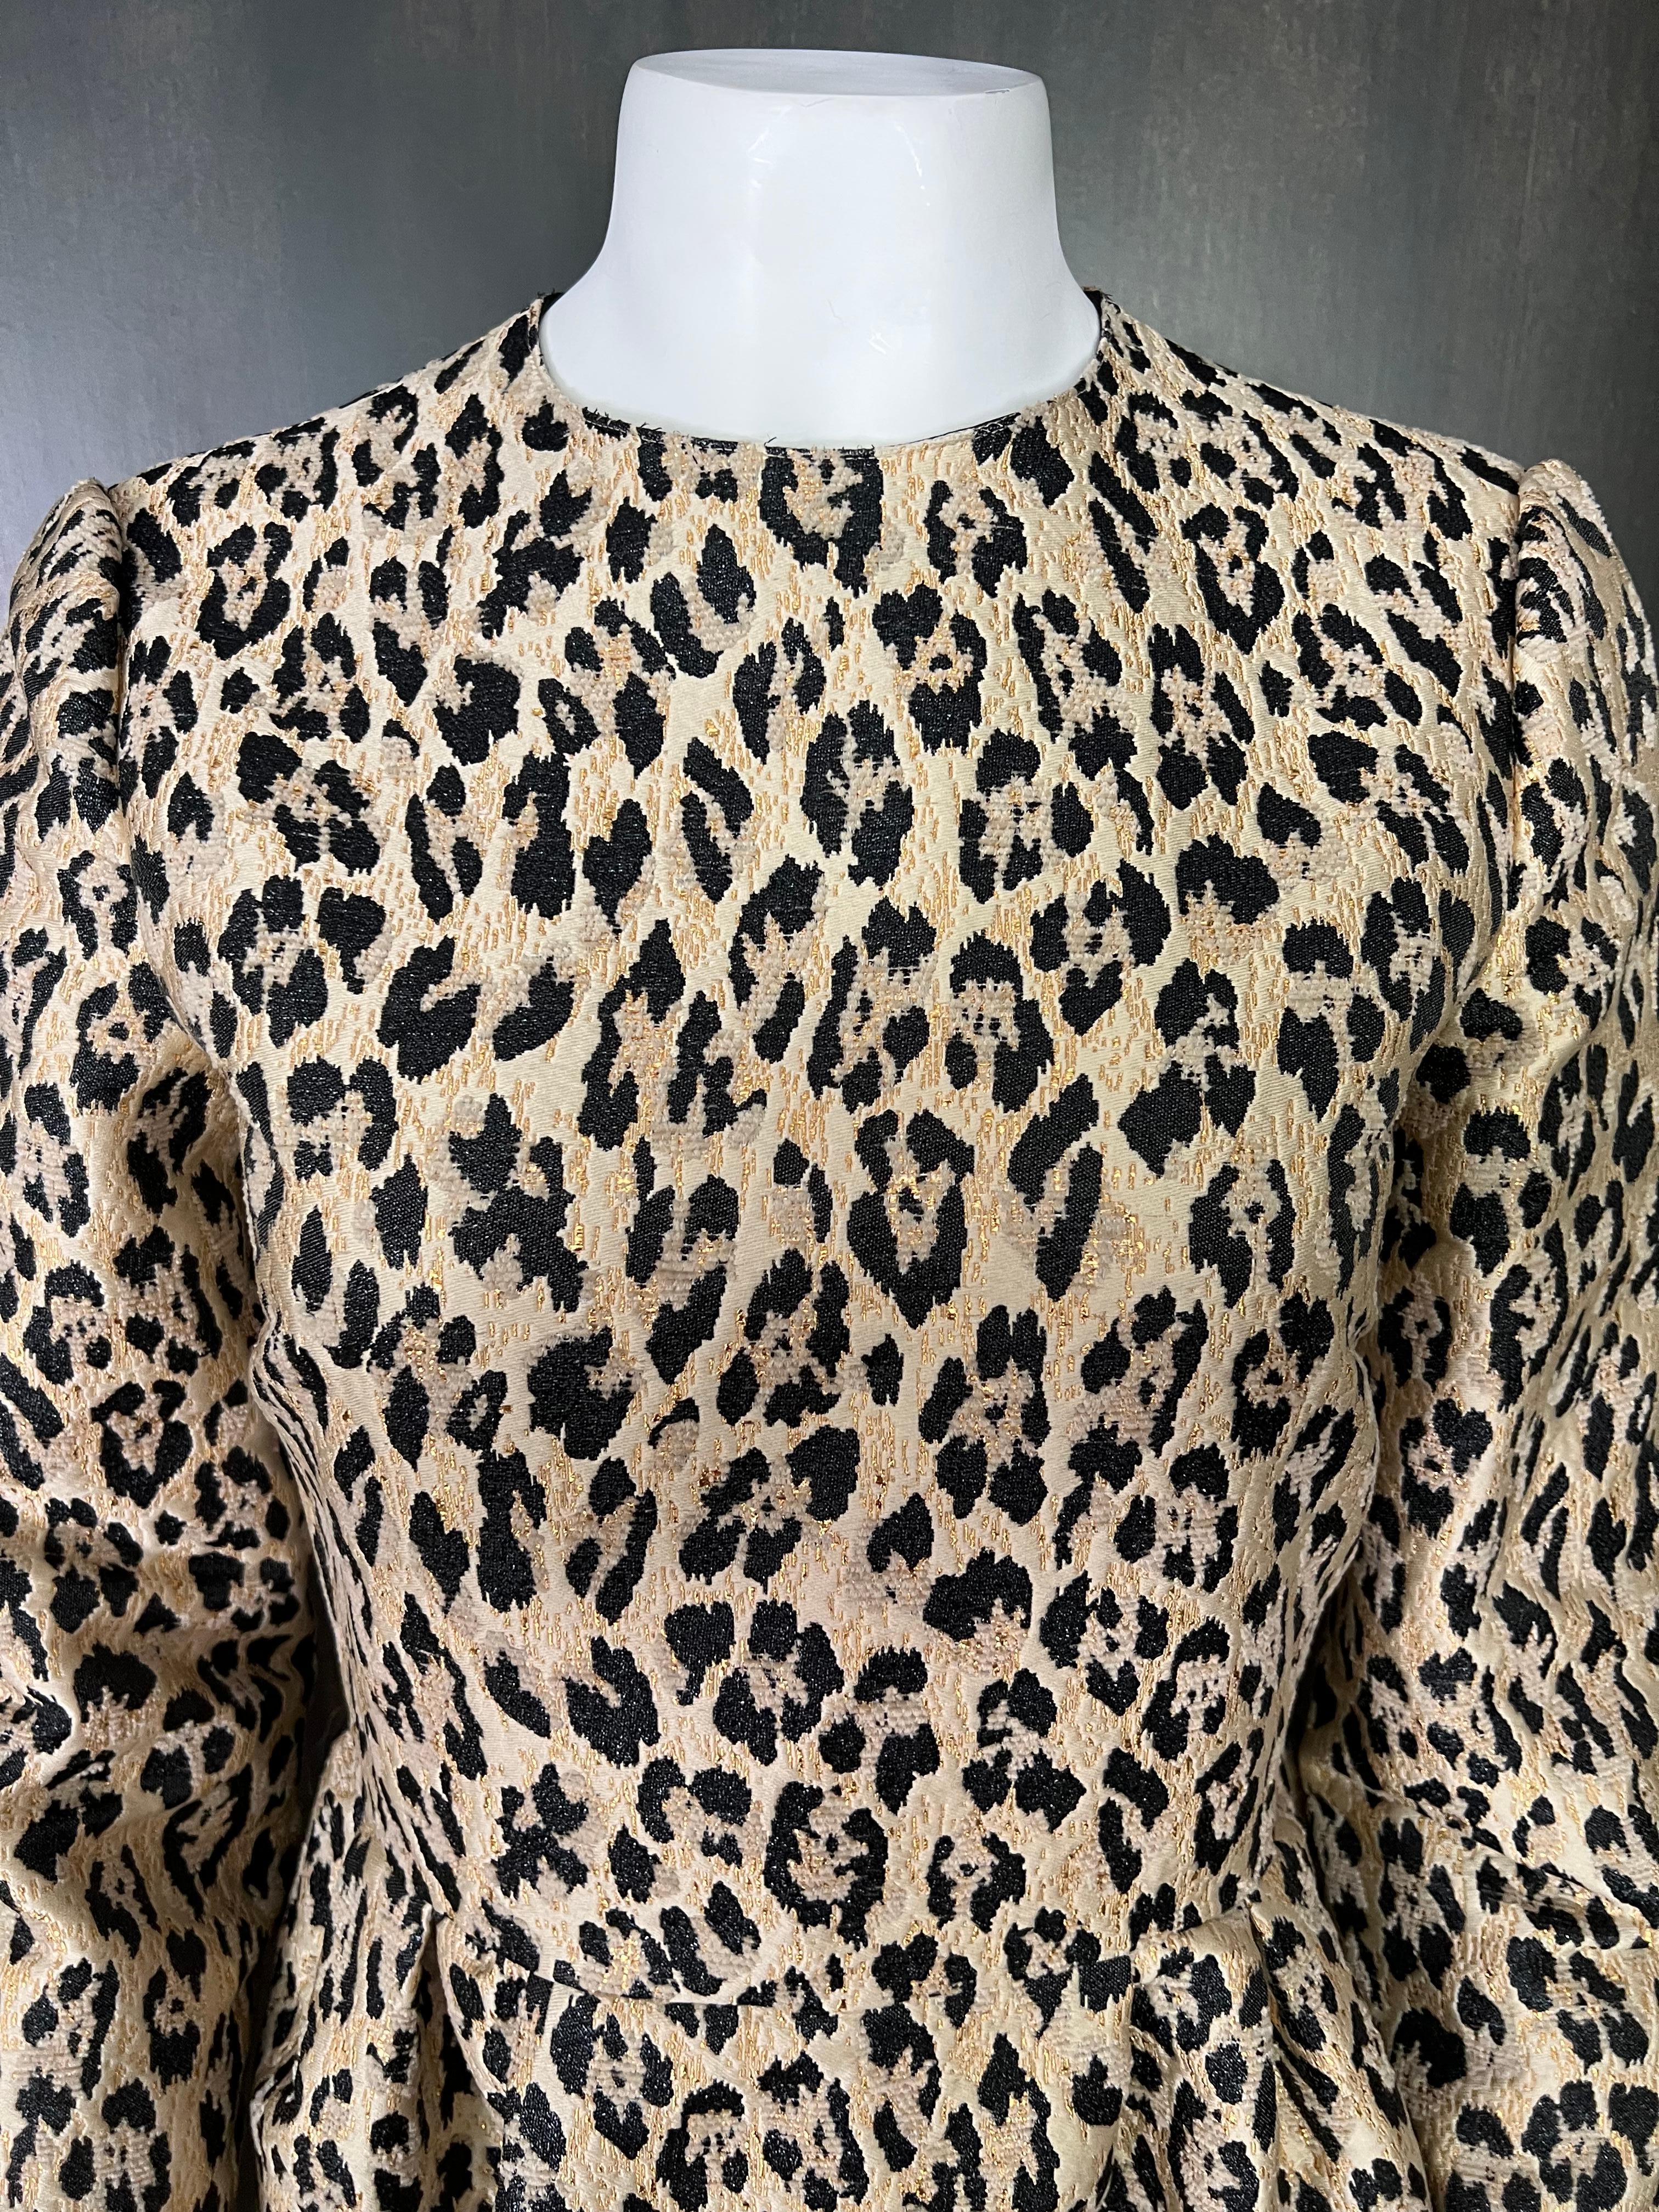 Valentino Leopard Brocade Dress, Size 44 In Excellent Condition For Sale In Beverly Hills, CA